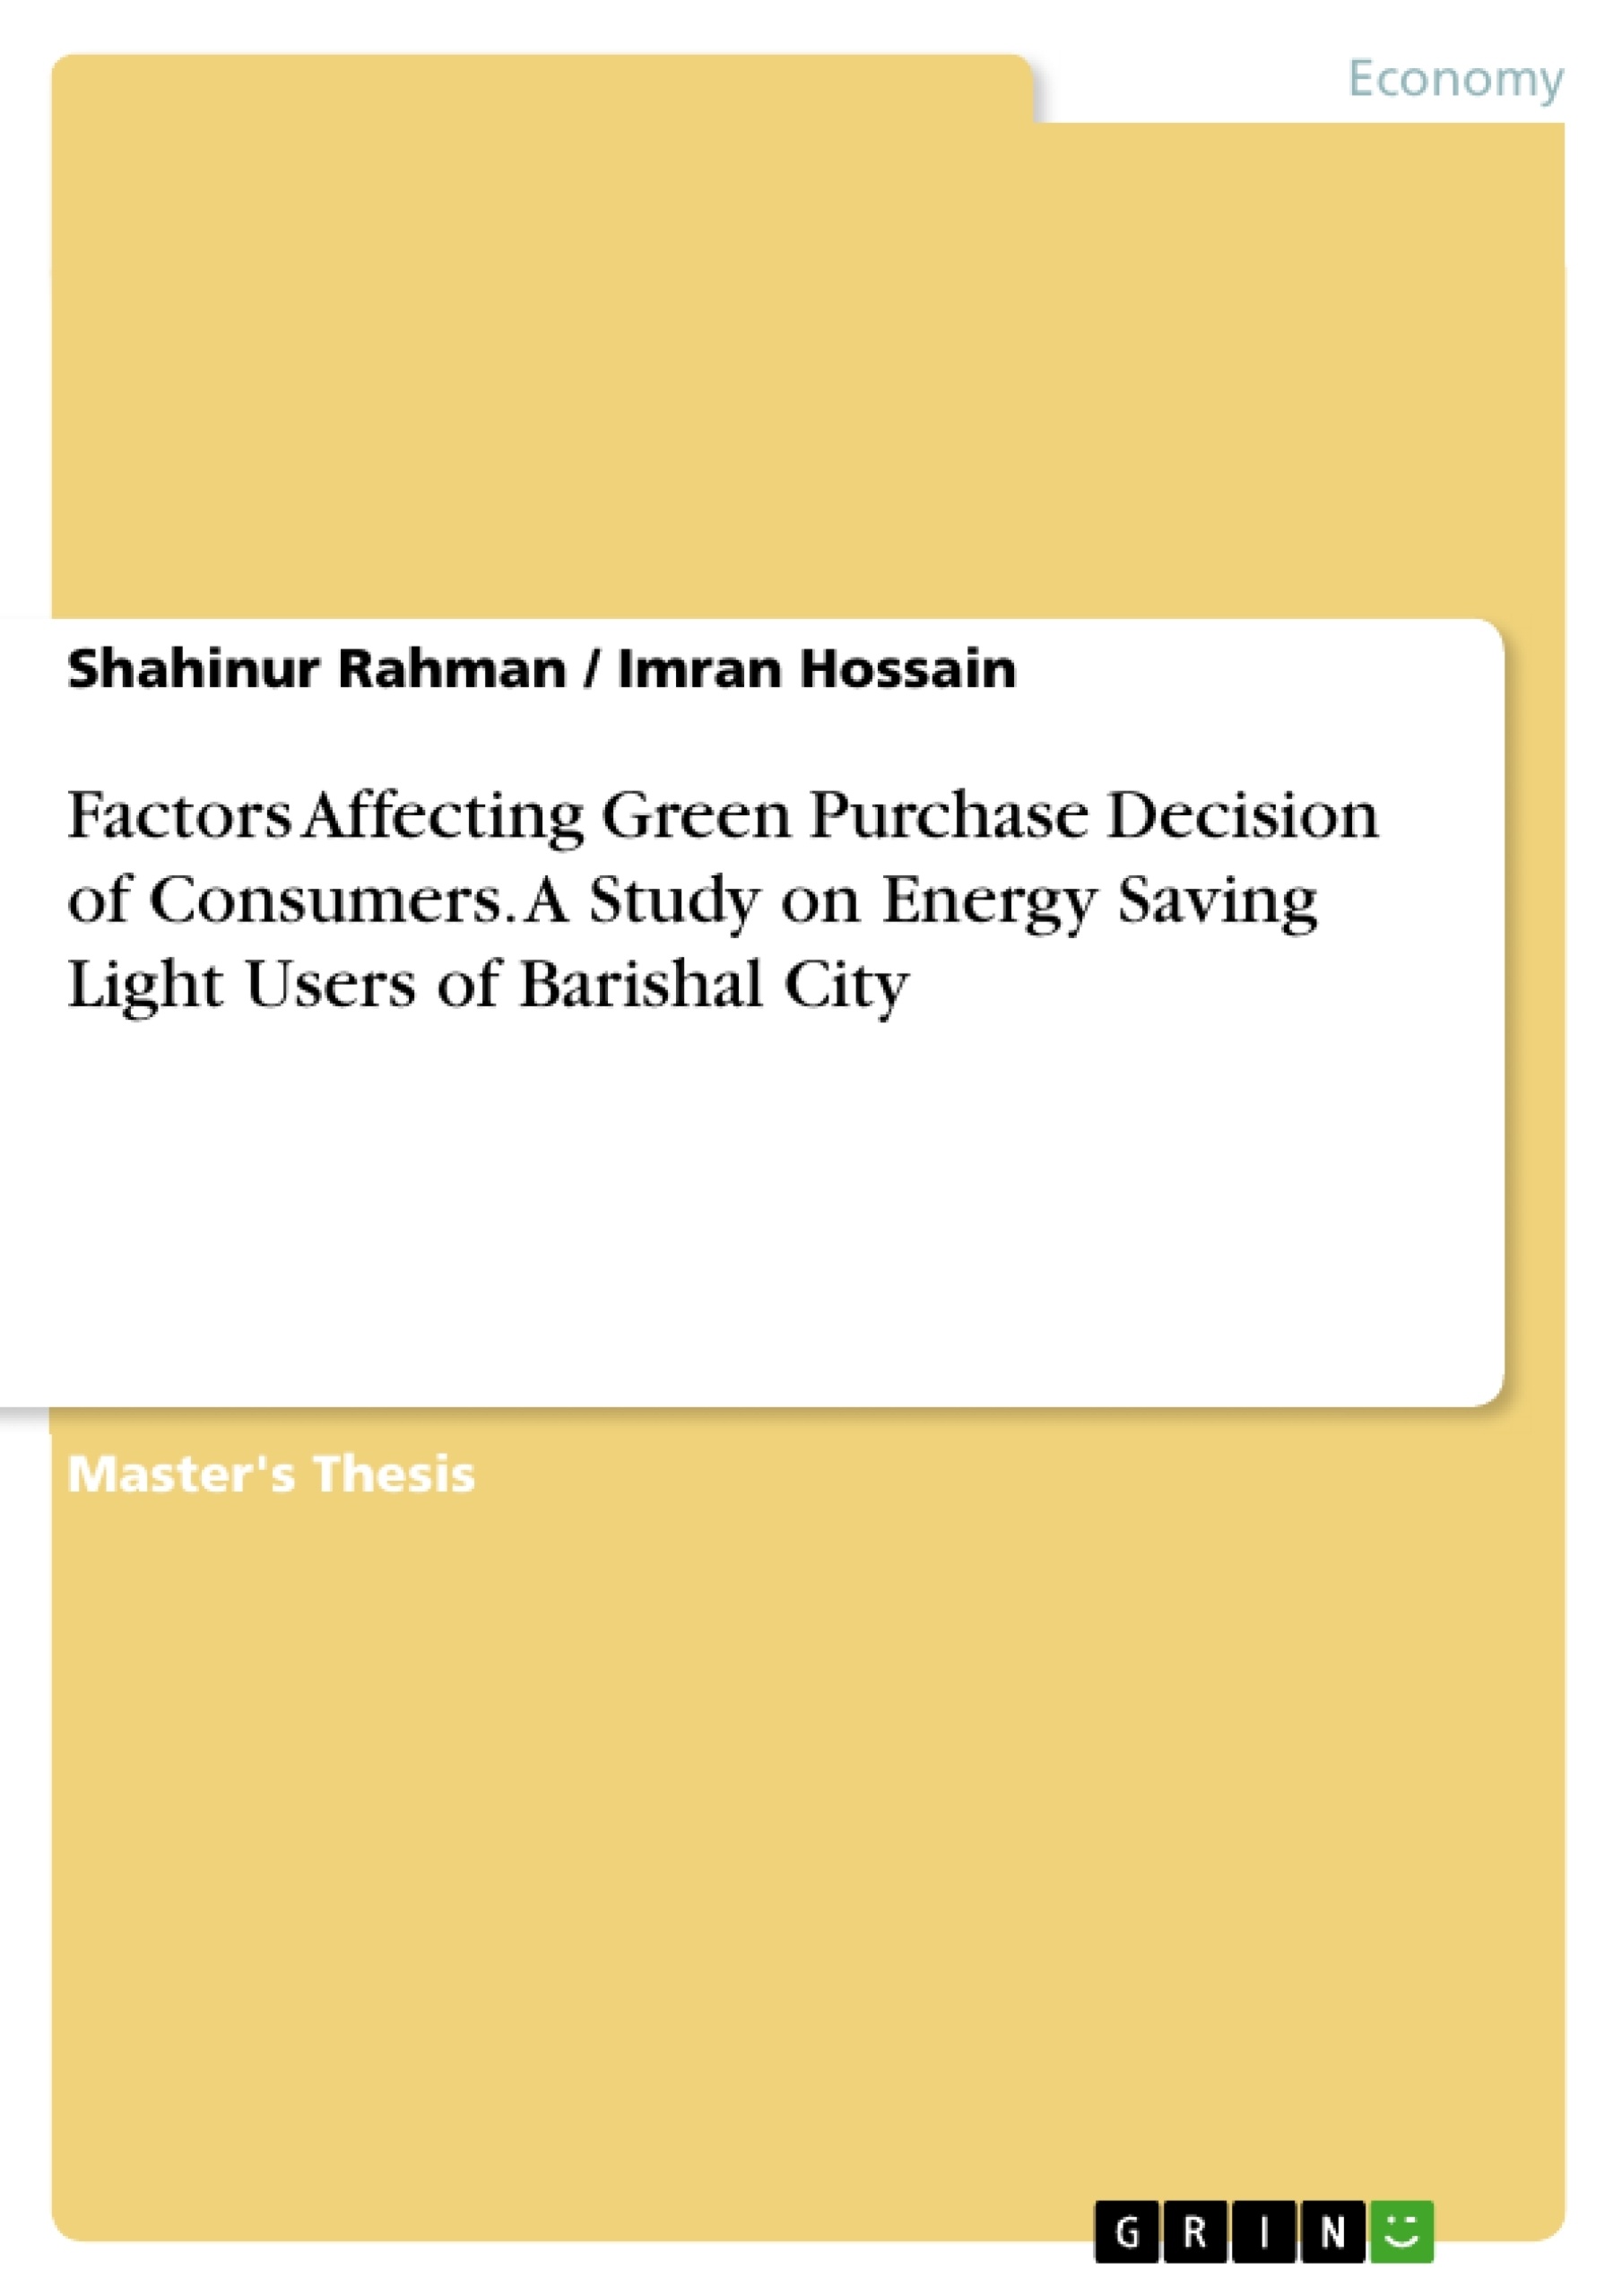 Titre: Factors Affecting Green Purchase Decision of Consumers. A Study on Energy Saving Light Users of Barishal City